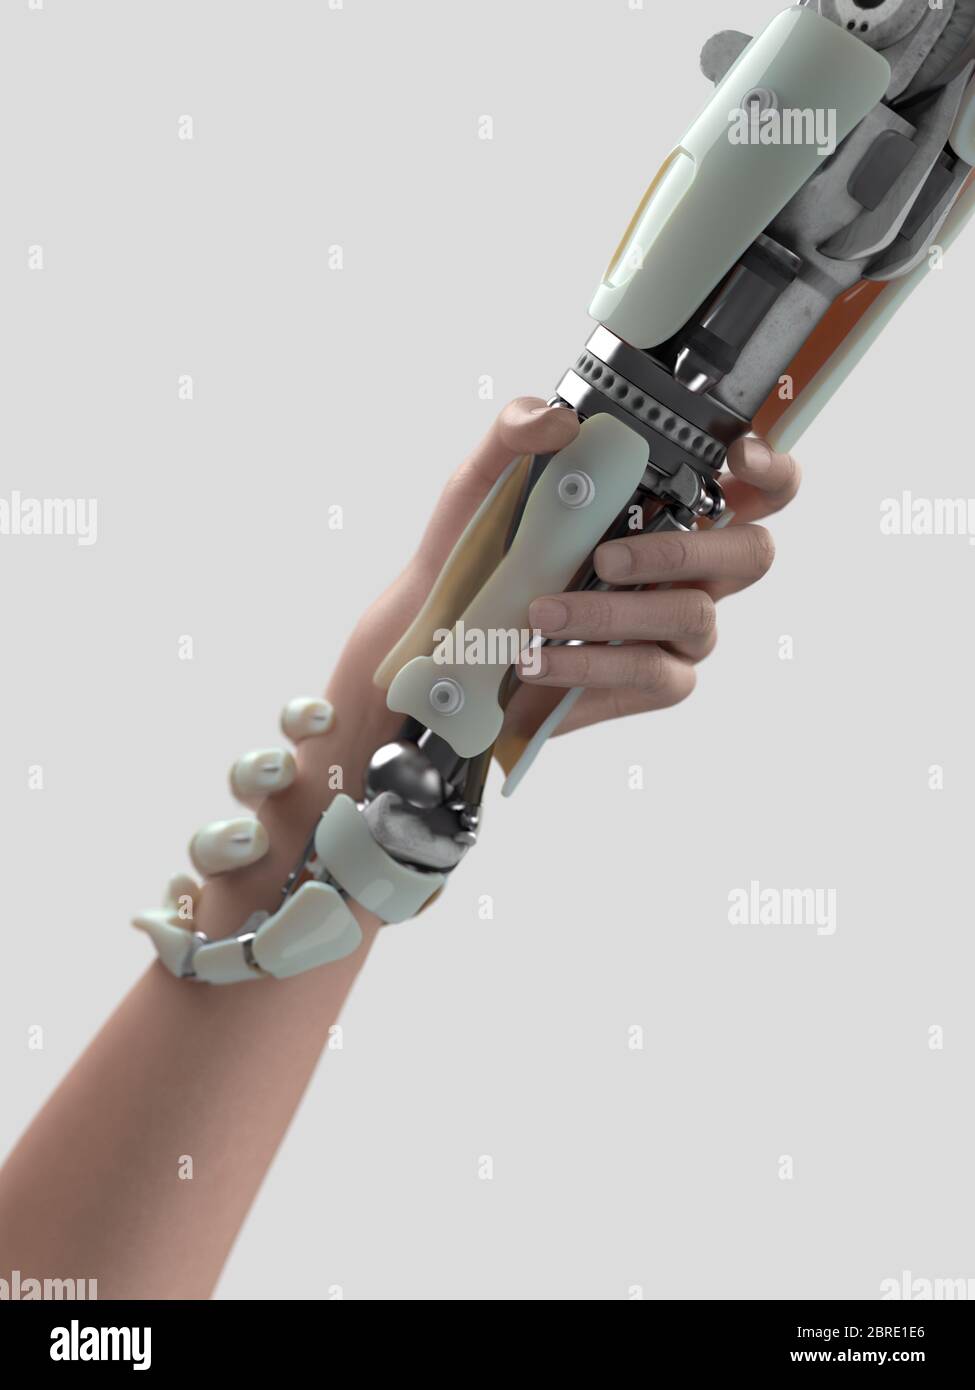 holding hands of a robot and human Stock Photo